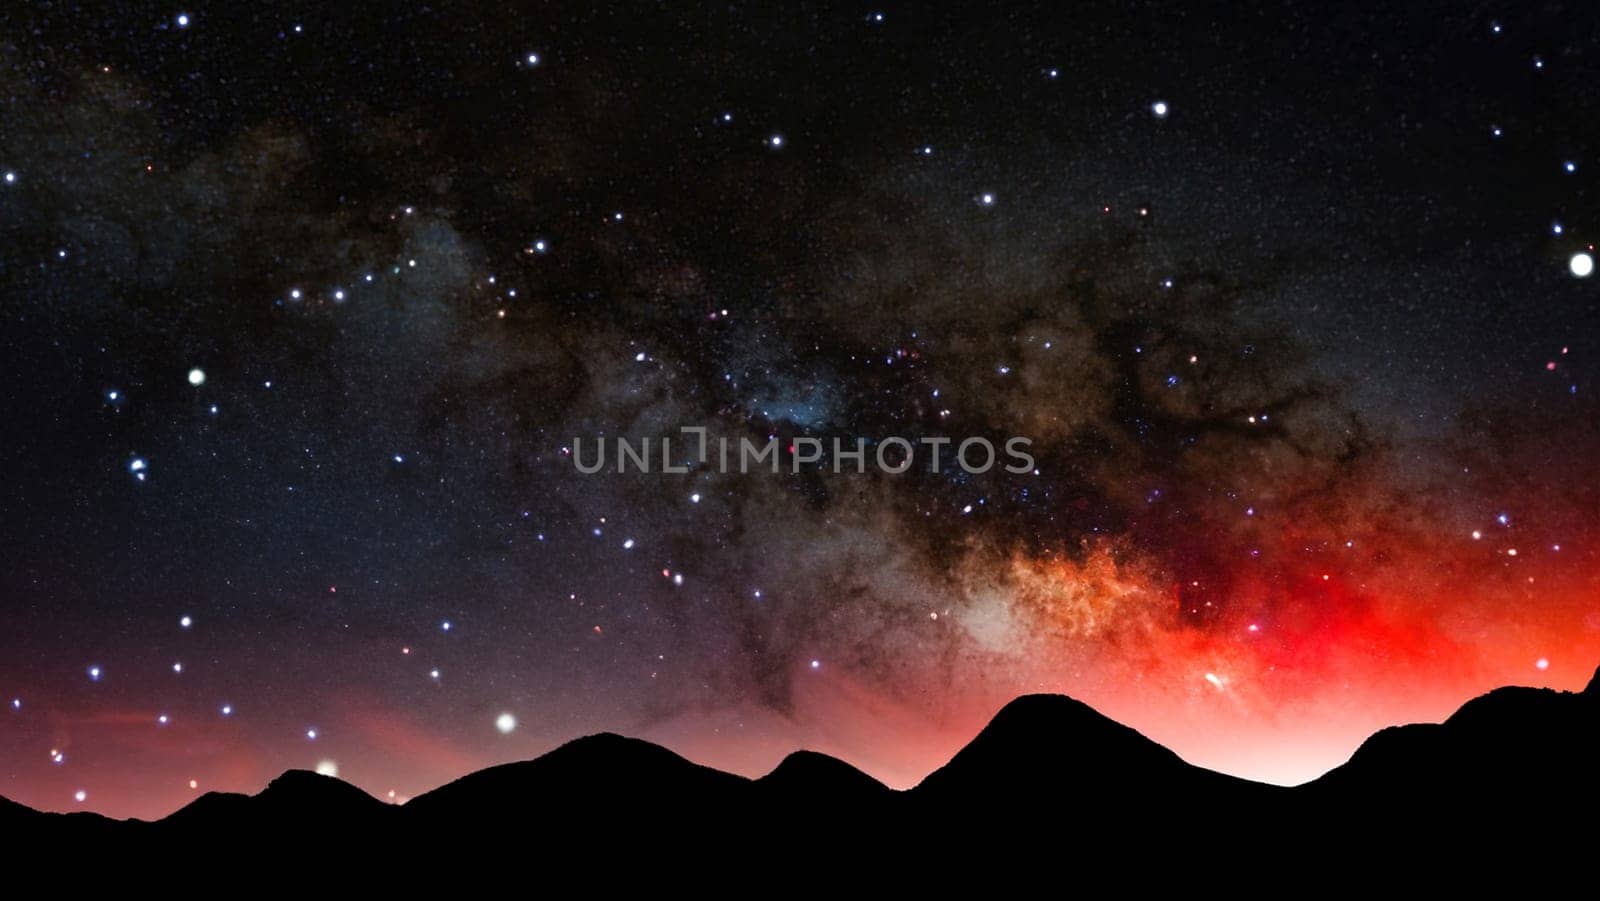 Milky Way over the mountains with stars and nebulae by yilmazsavaskandag